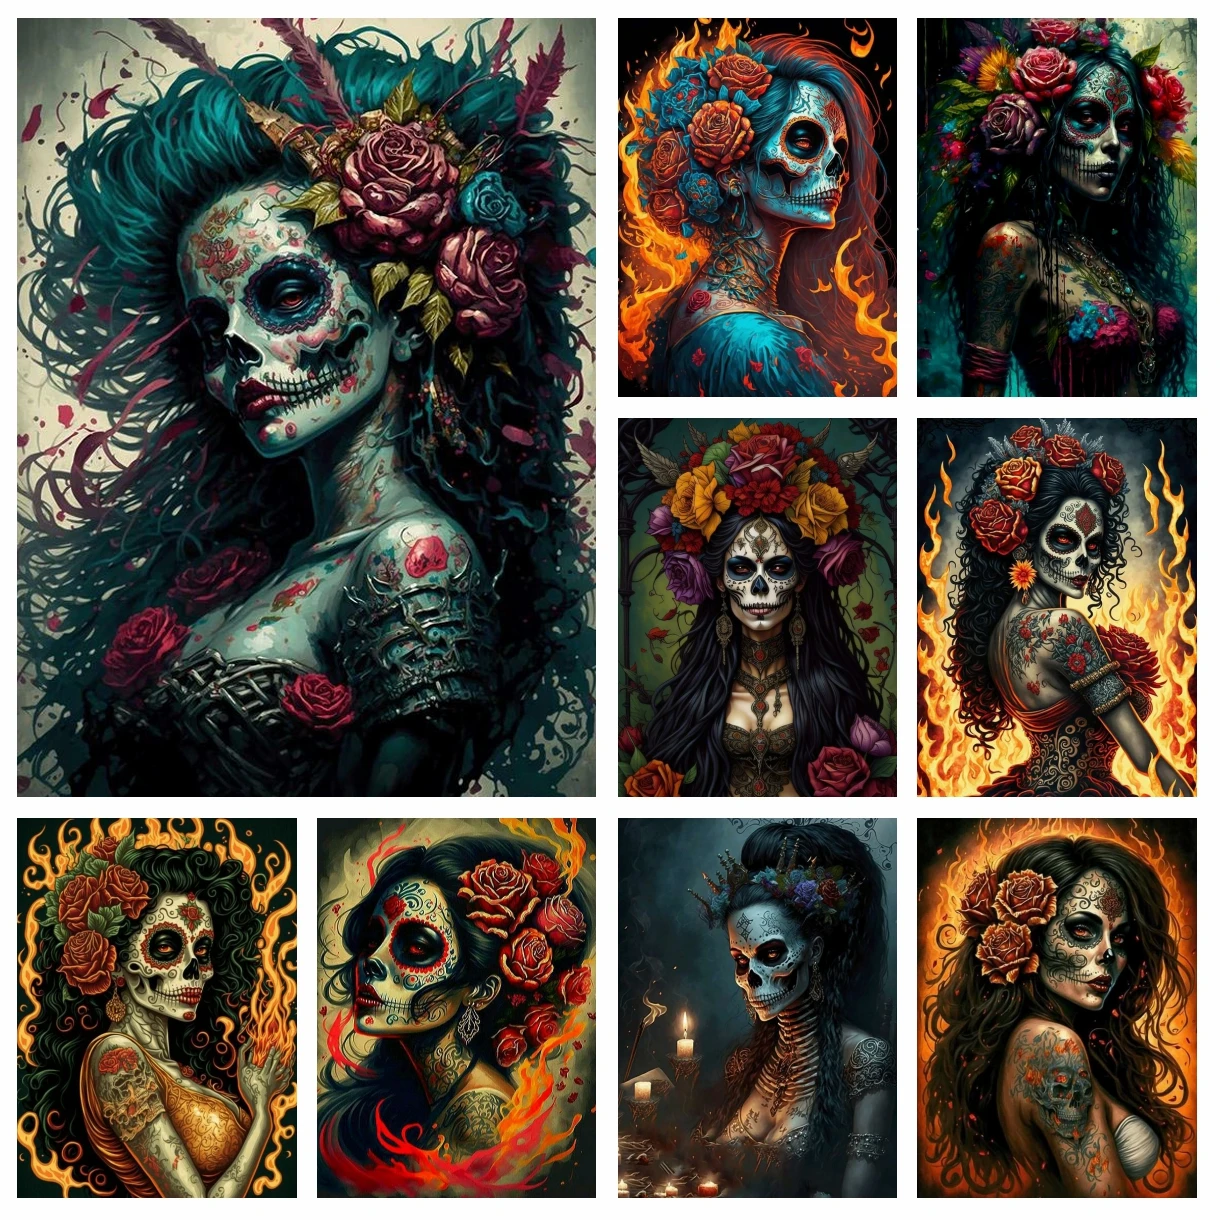 

DIY Horror Gothic Woman Diamond Painting Halloween Skeleton Girl Art Cross Stitch Kit Embroidery Picture Mosaic Craft Home Decor